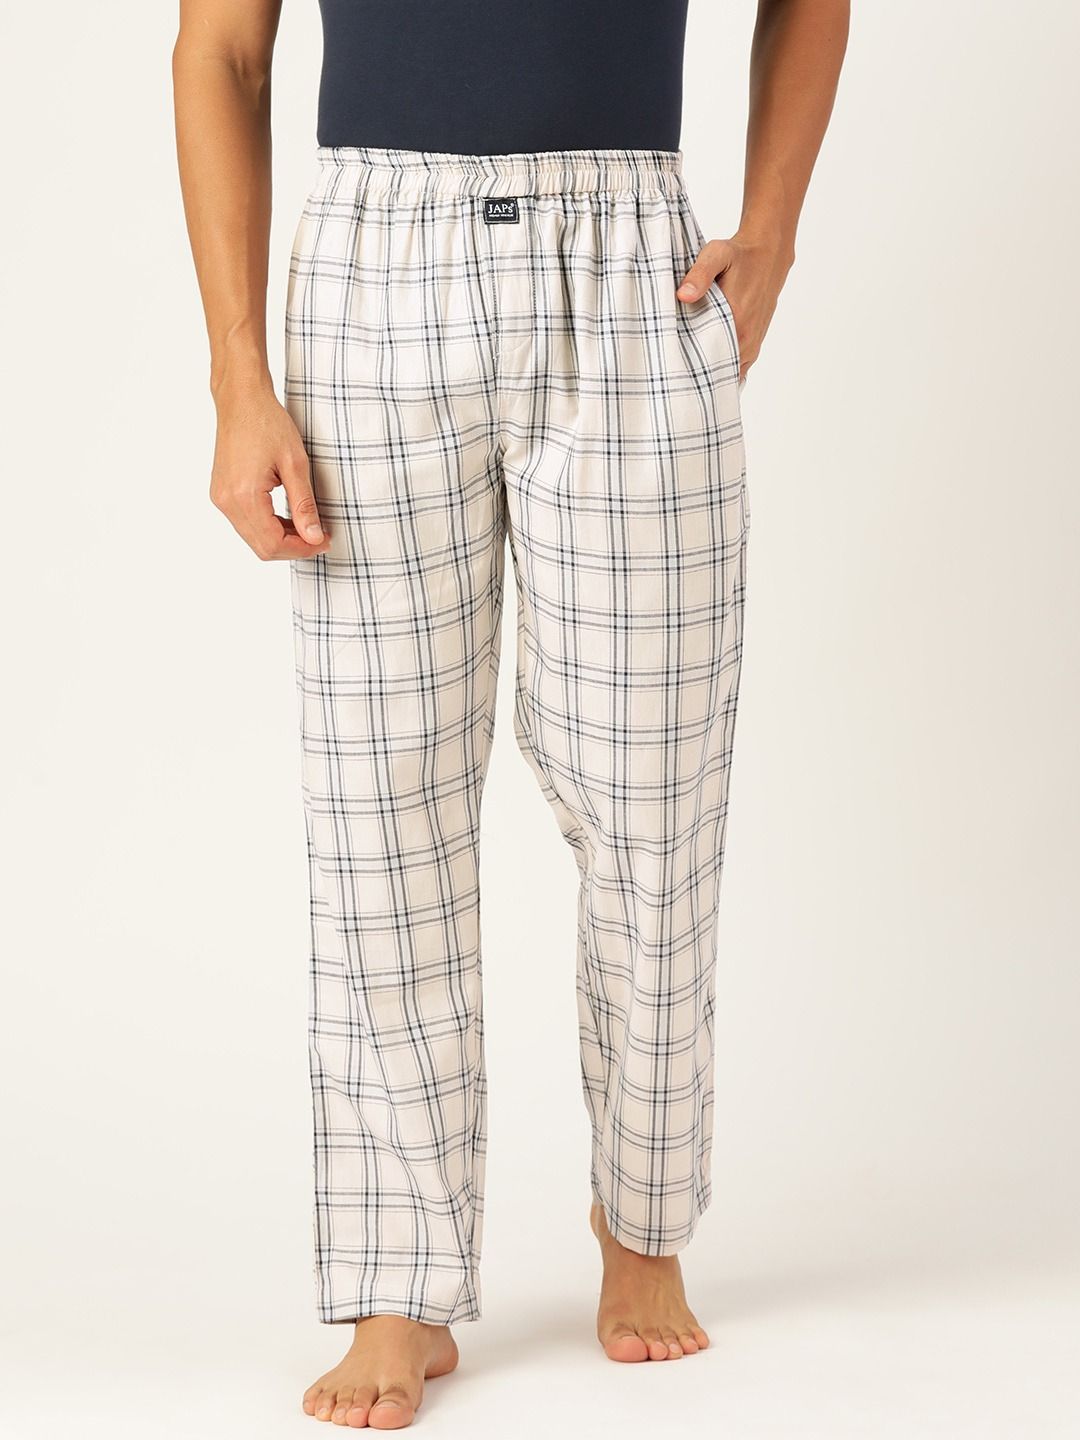 Blue Checked Premium Cotton Lounge Pant Pajama Online In India Color Blue  SizeShirt M